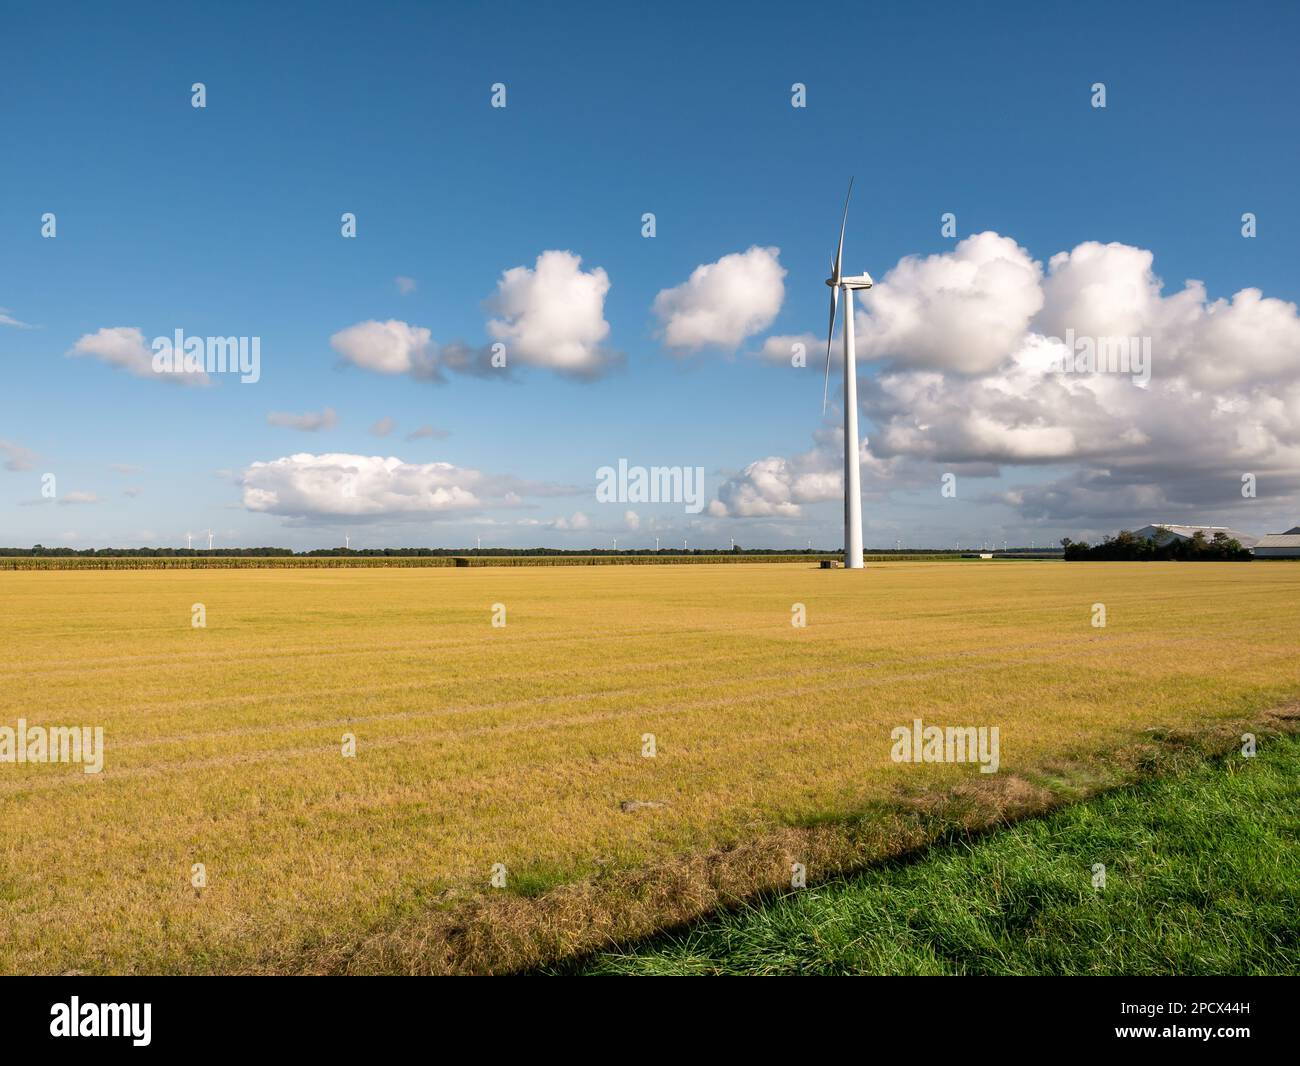 Weed killer, glyphosate, a chemical herbicide, sprayed on field to control weeds in Flevopolder, Netherlands Stock Photo